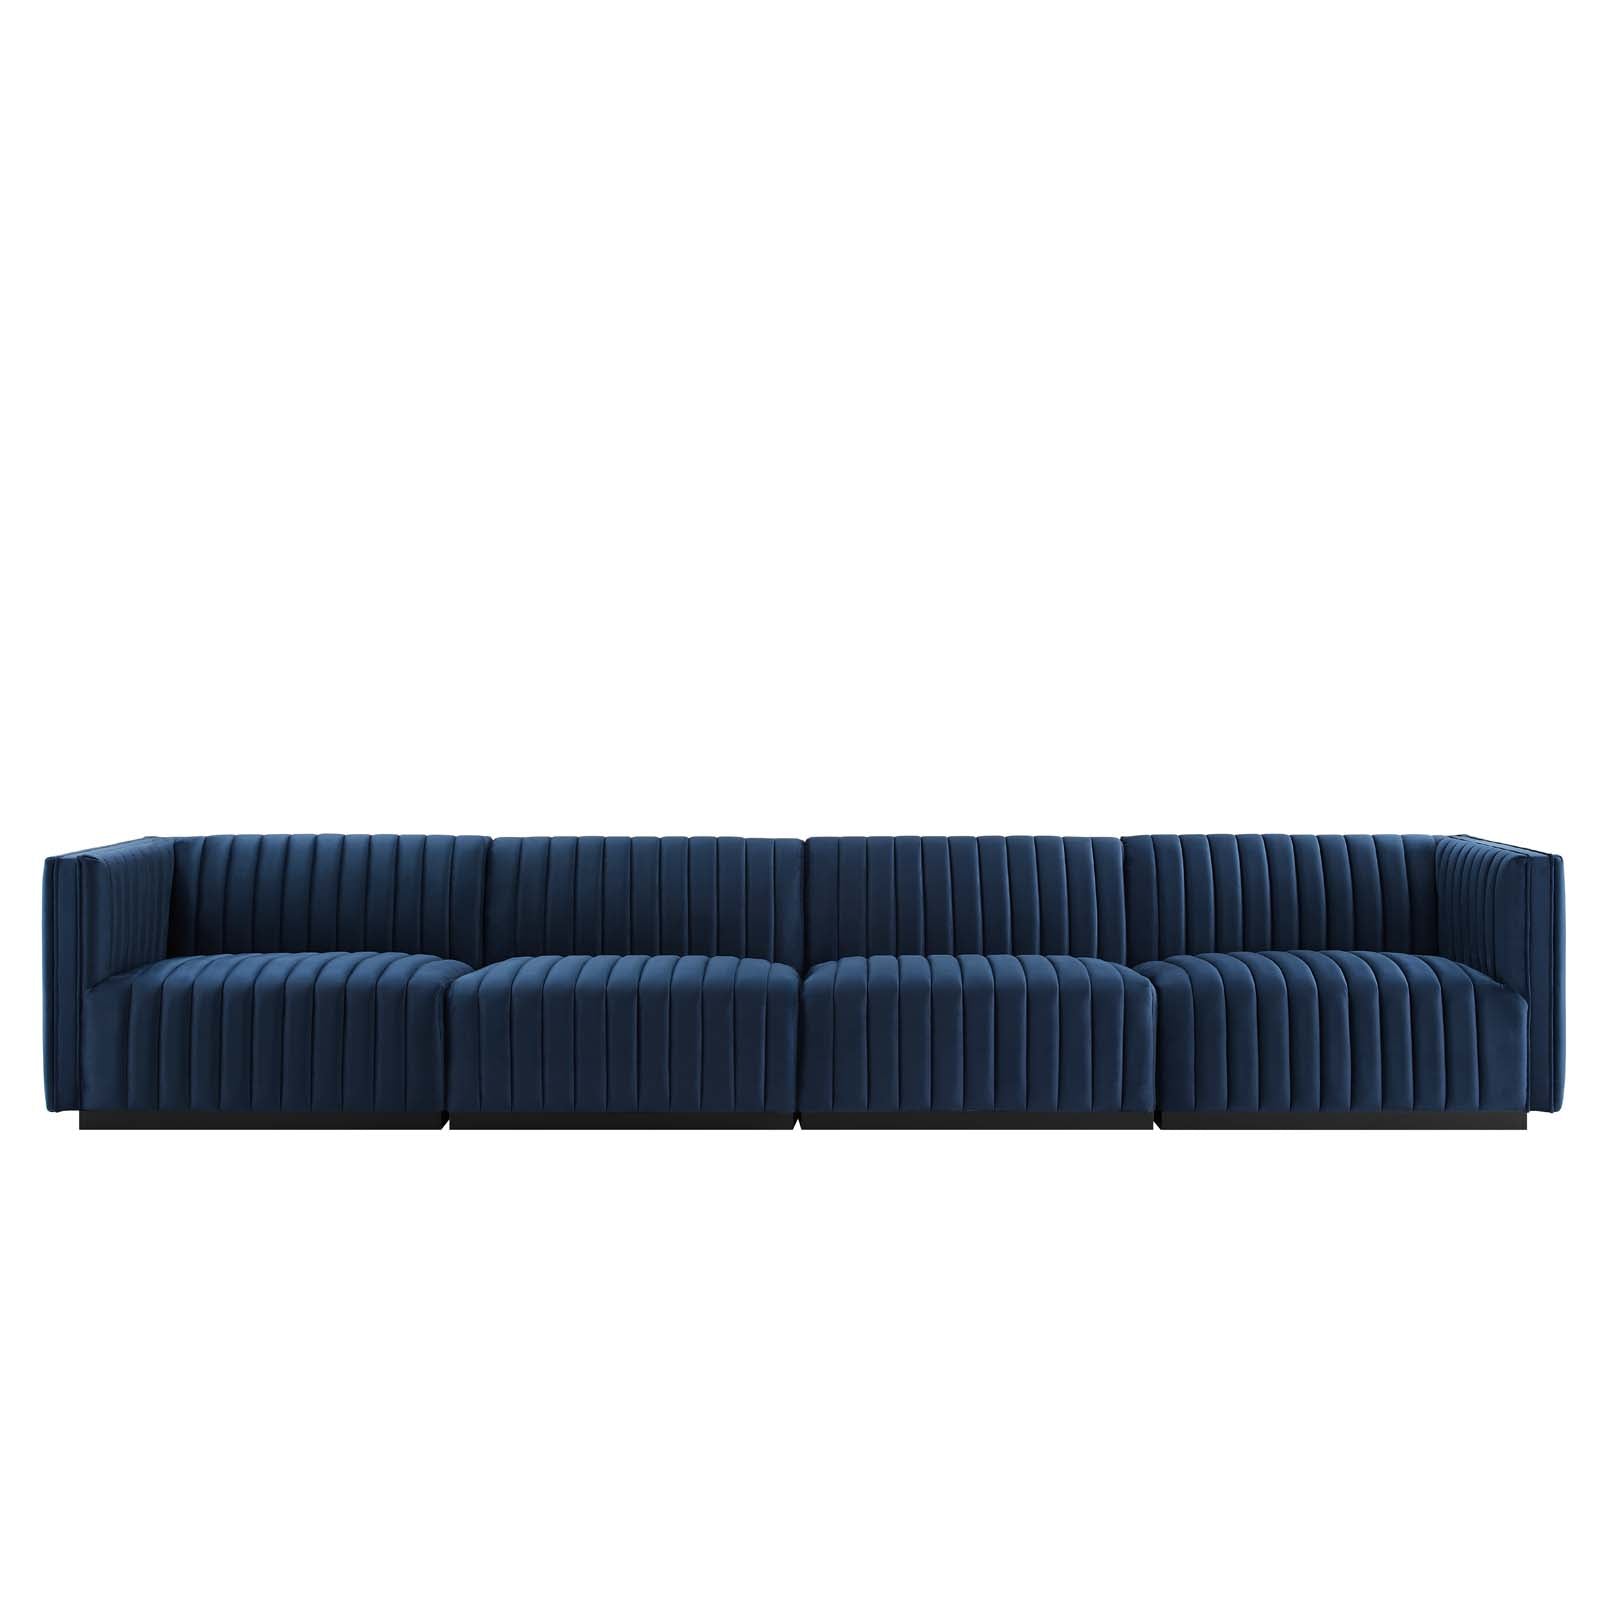 Modway Sofas & Couches - Conjure Channel Tufted Performance Velvet 4-Piece Sofa Black Midnight Blue